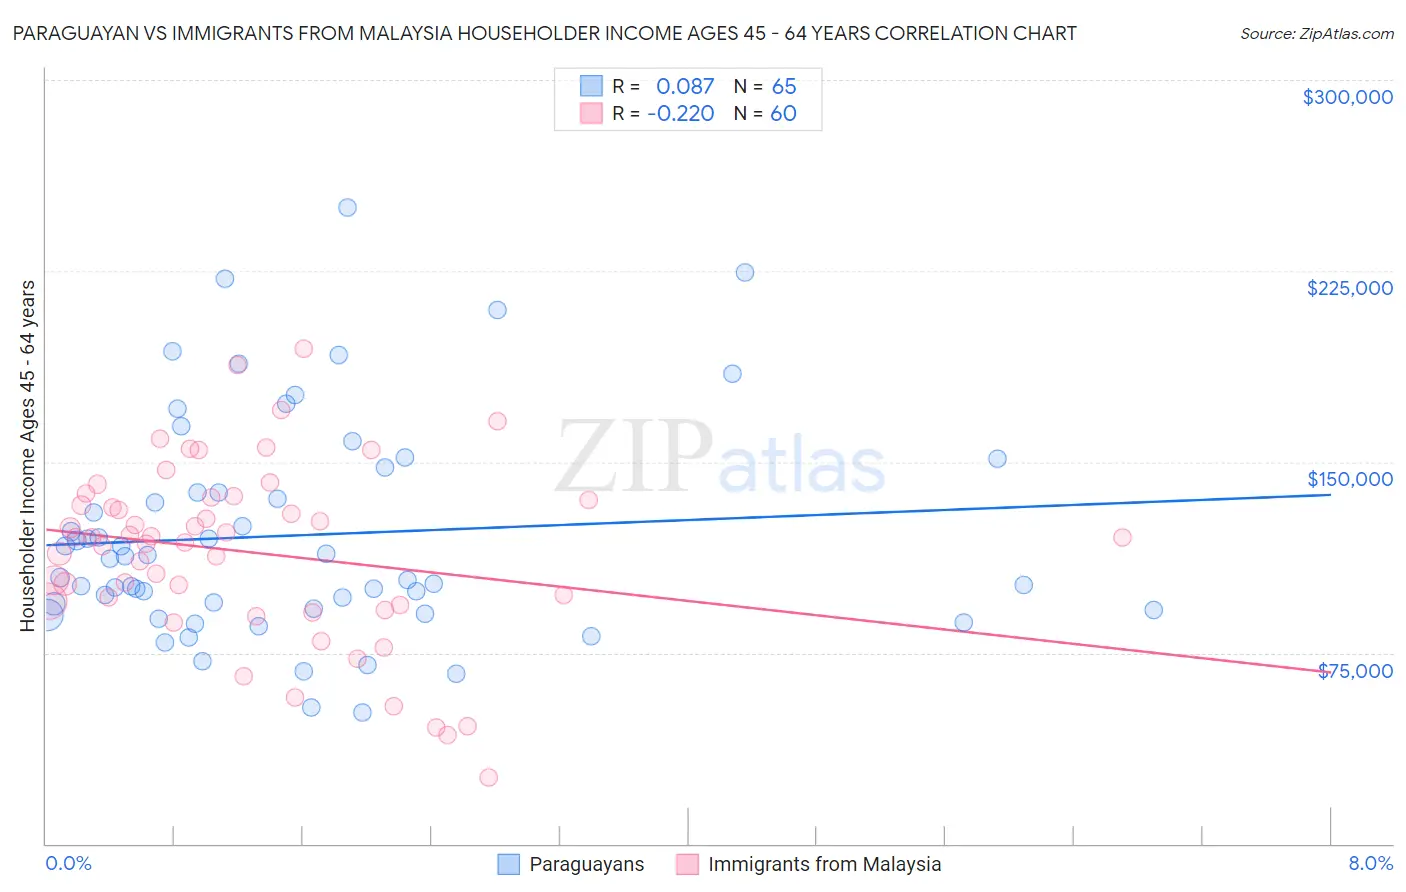 Paraguayan vs Immigrants from Malaysia Householder Income Ages 45 - 64 years